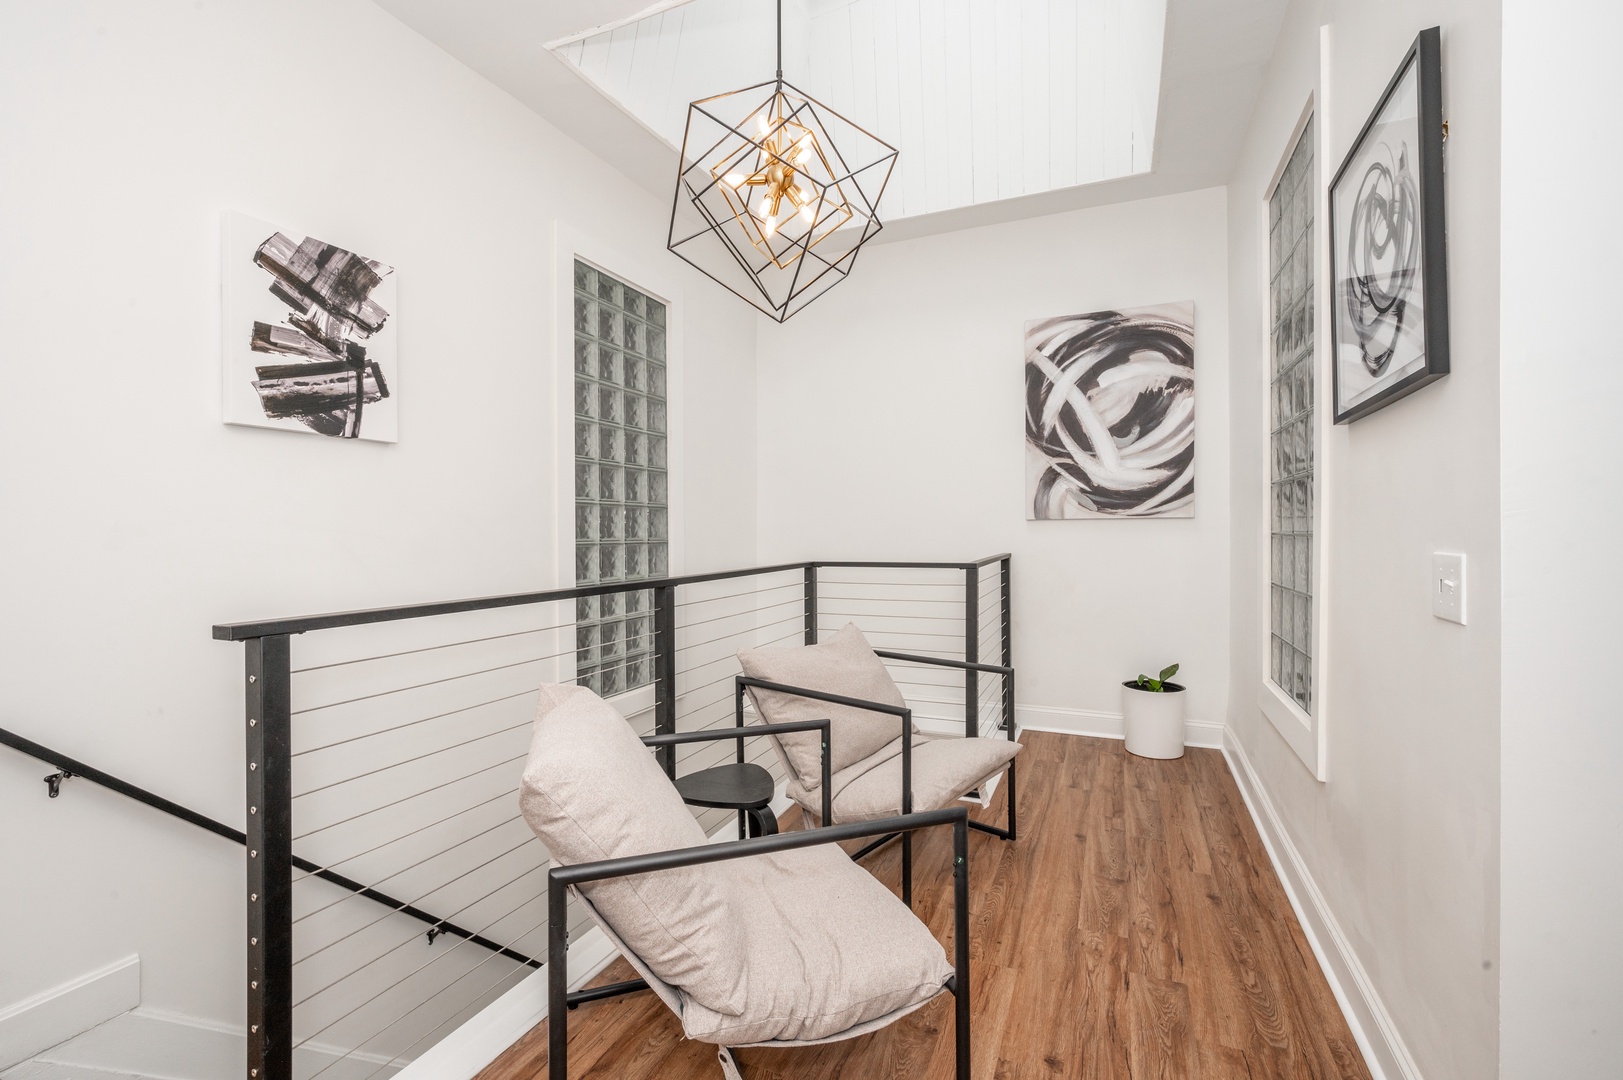 Enjoy the soaring ceilings & wide skylight in the building stairwell